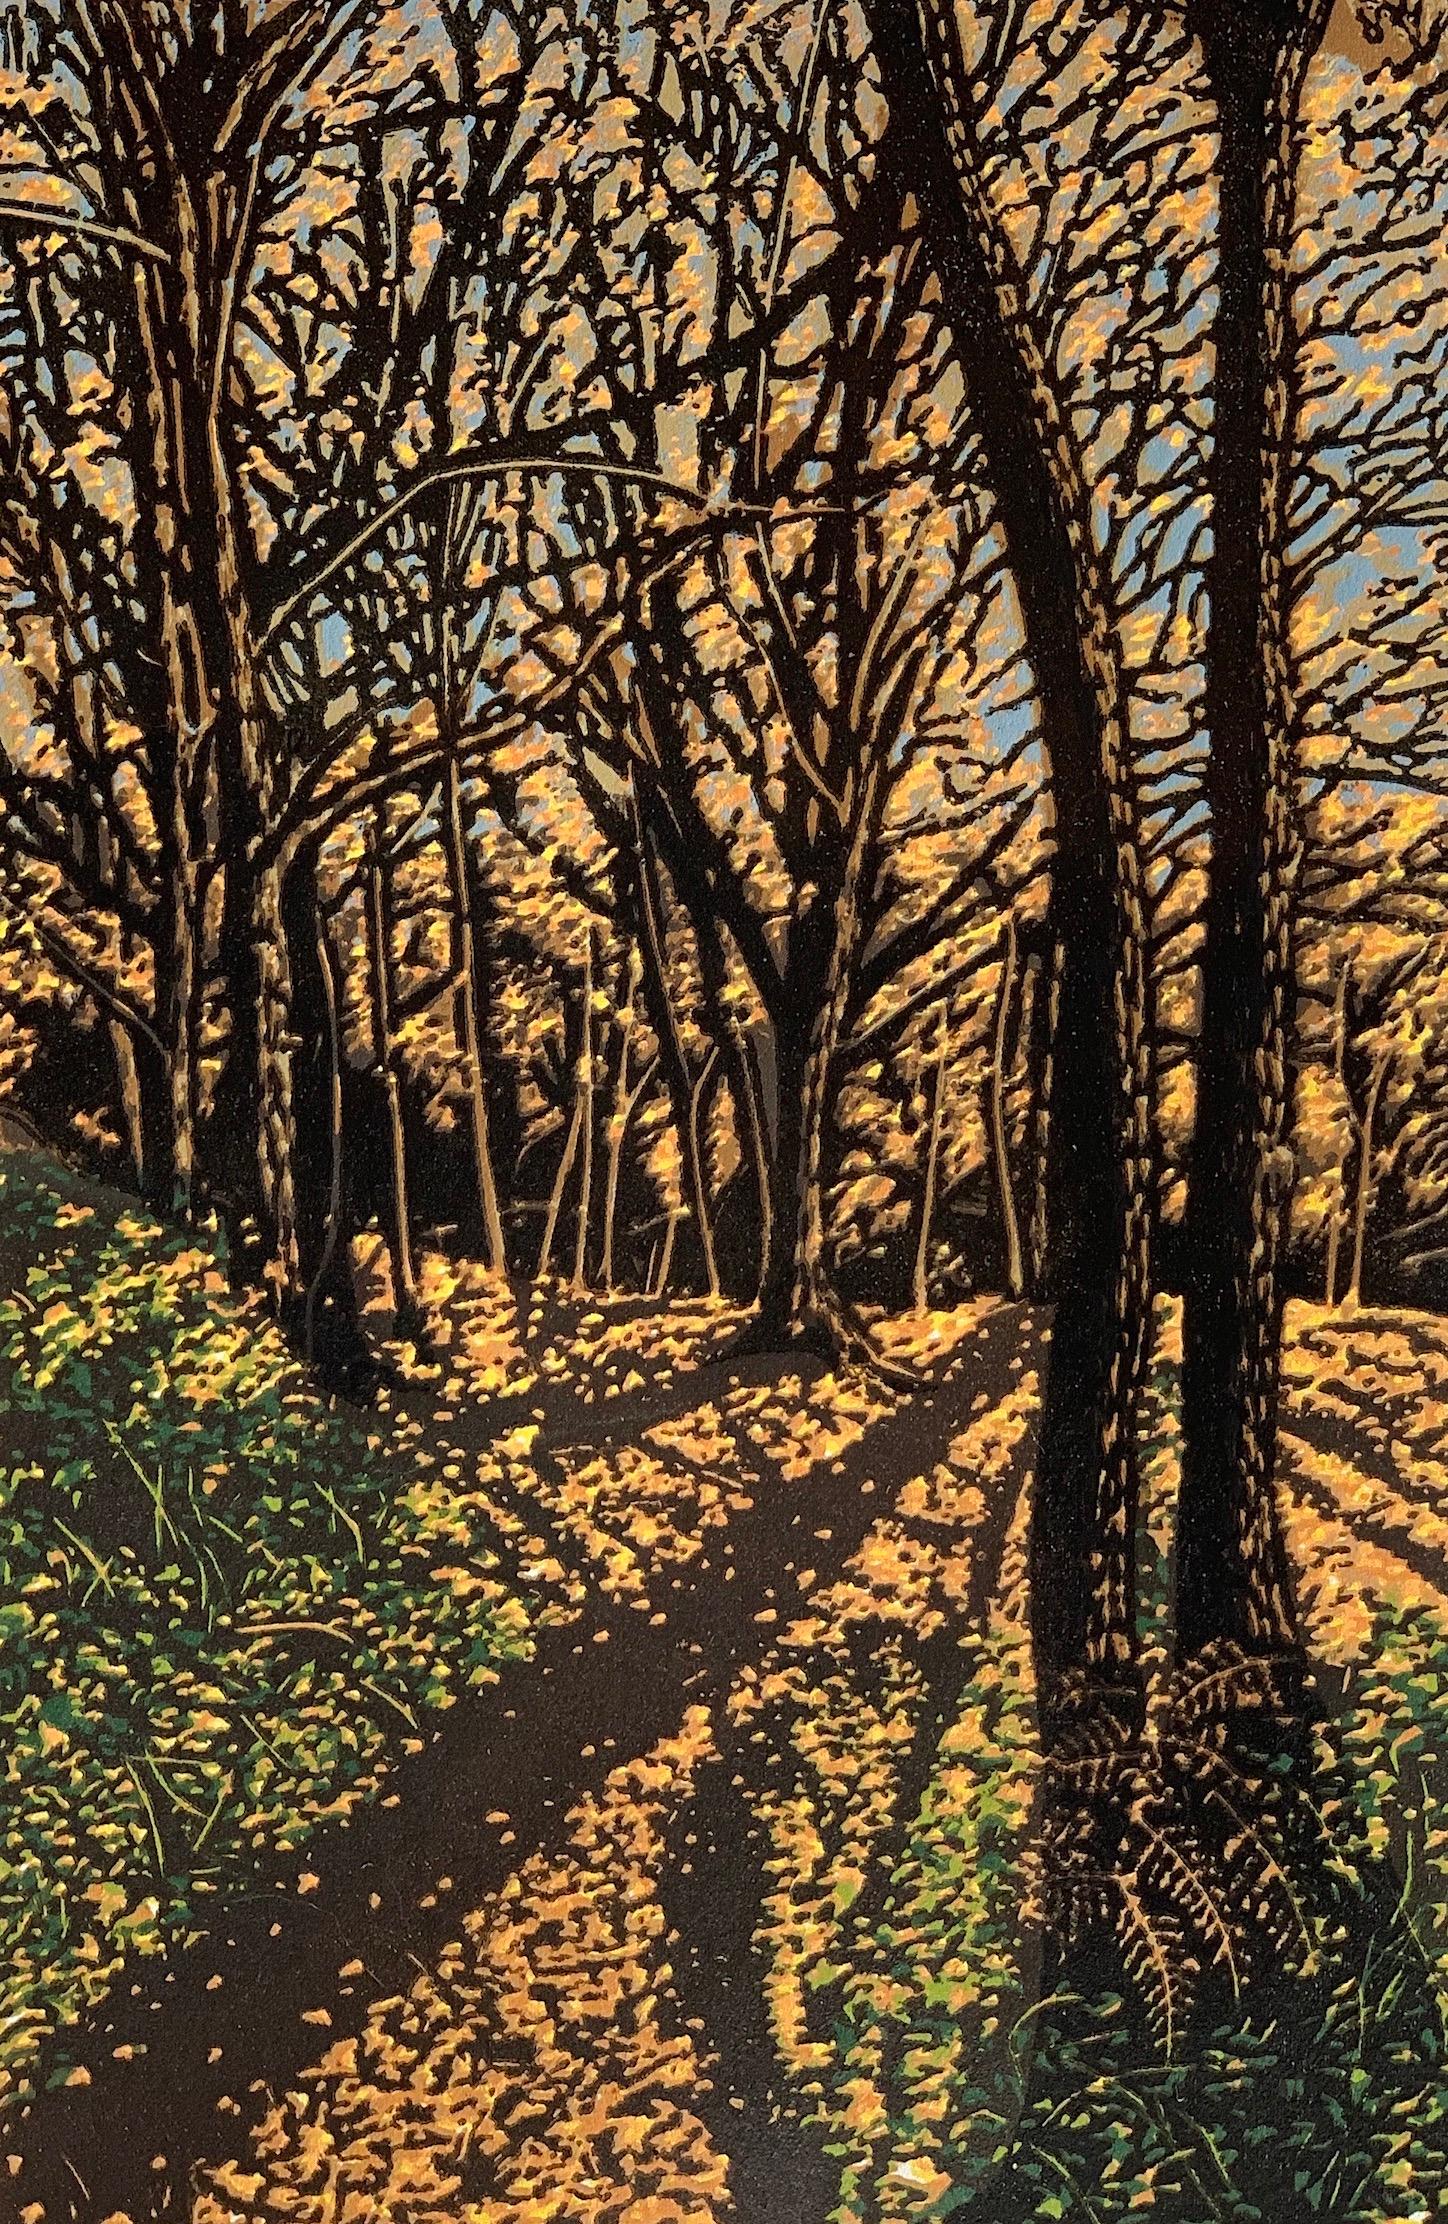 Autumn gold [2022]
 
Mid November in the Surrey hills when the Autumnal colours are most vivid. Shades of gold, burnt orange, yellow ochre and beige dominate the woodland.
 
Additional Information:
limited_edition
Reduction linocut
Edition number